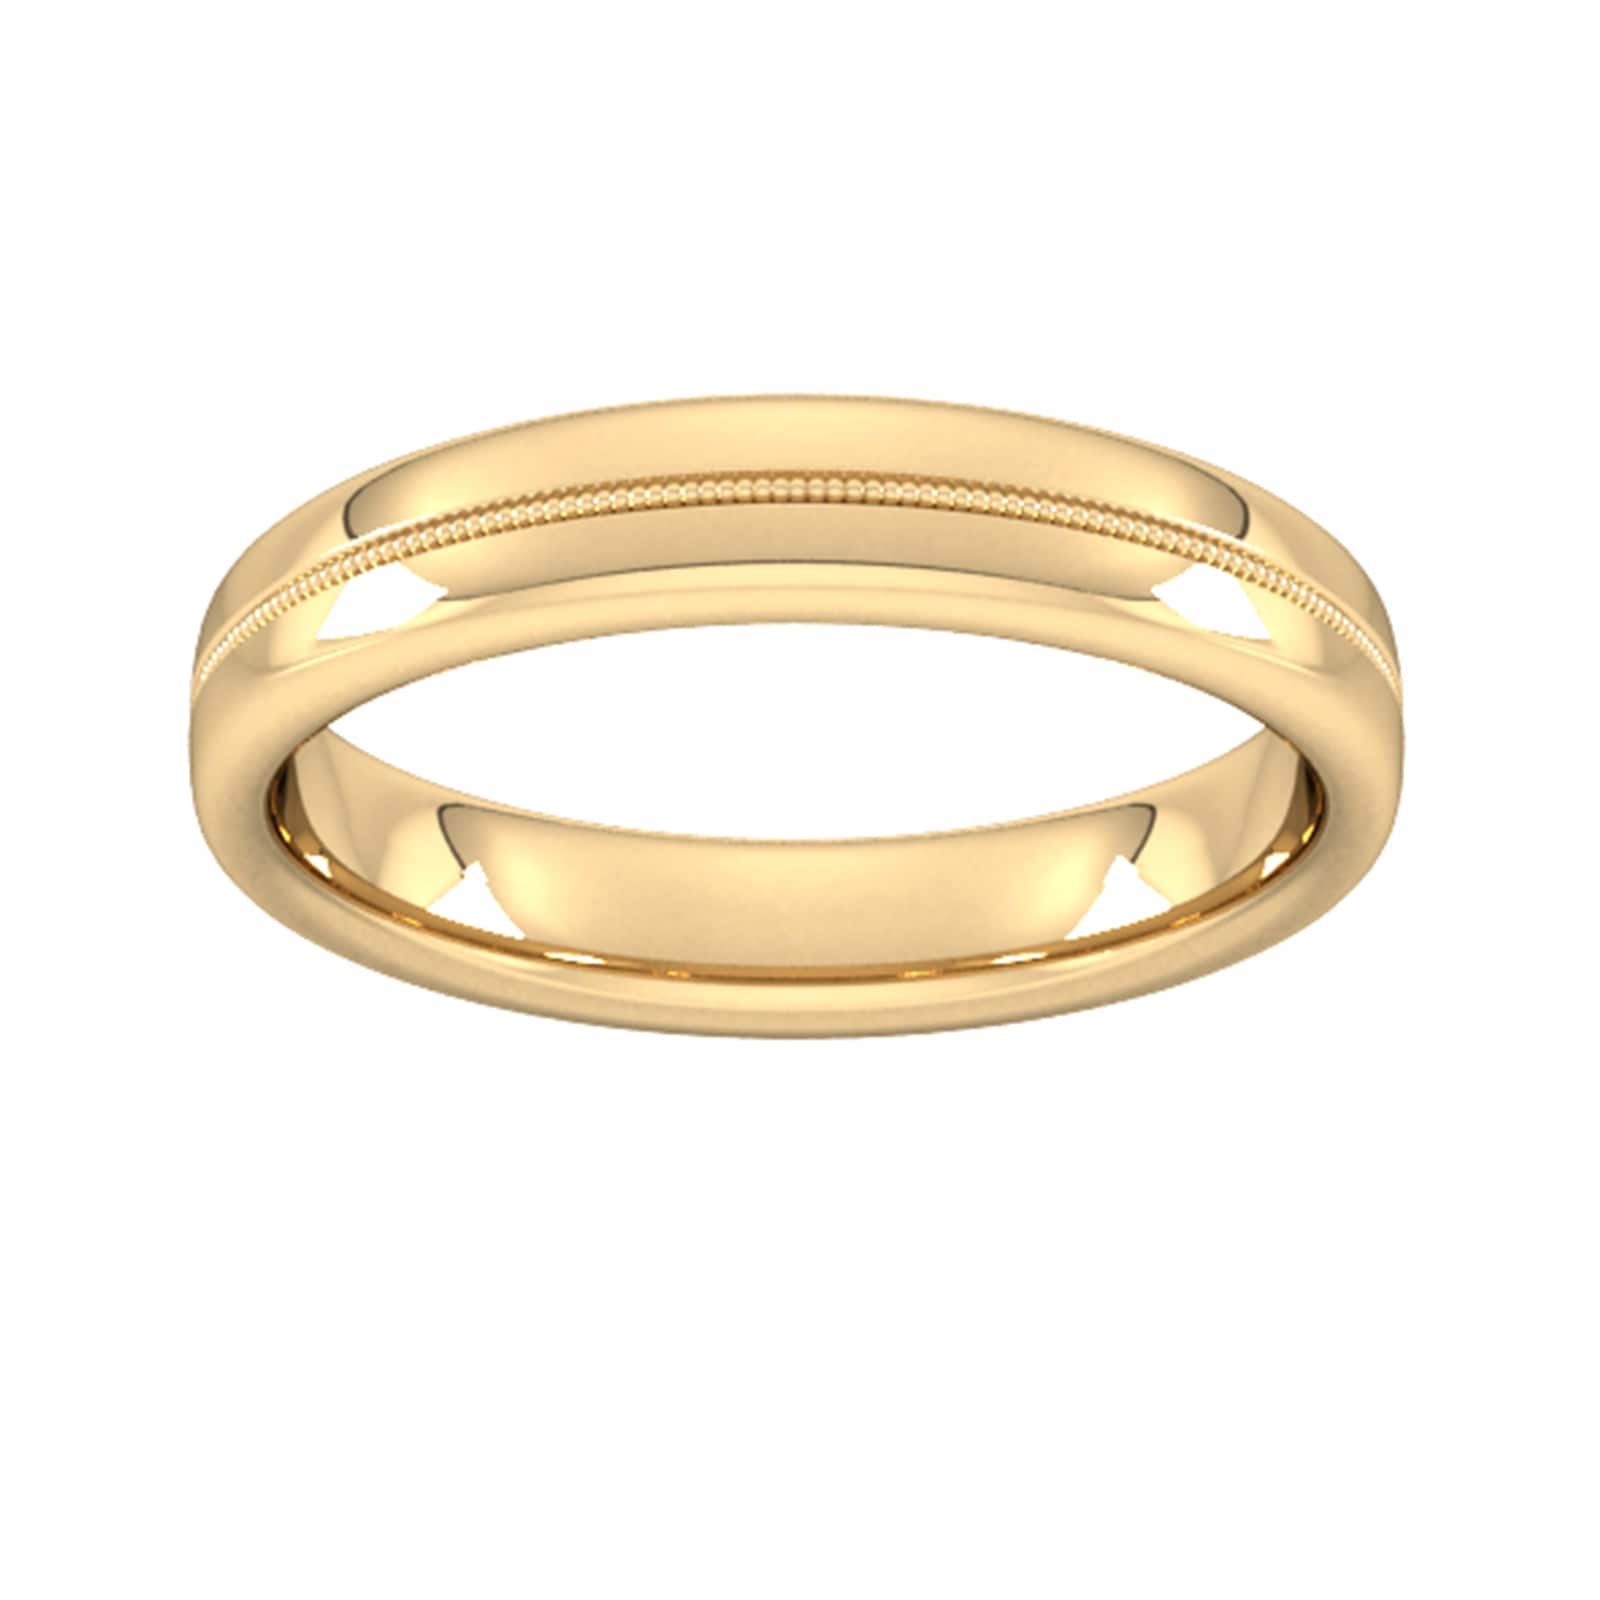 4mm Traditional Court Standard Milgrain Centre Wedding Ring In 18 Carat Yellow Gold - Ring Size U